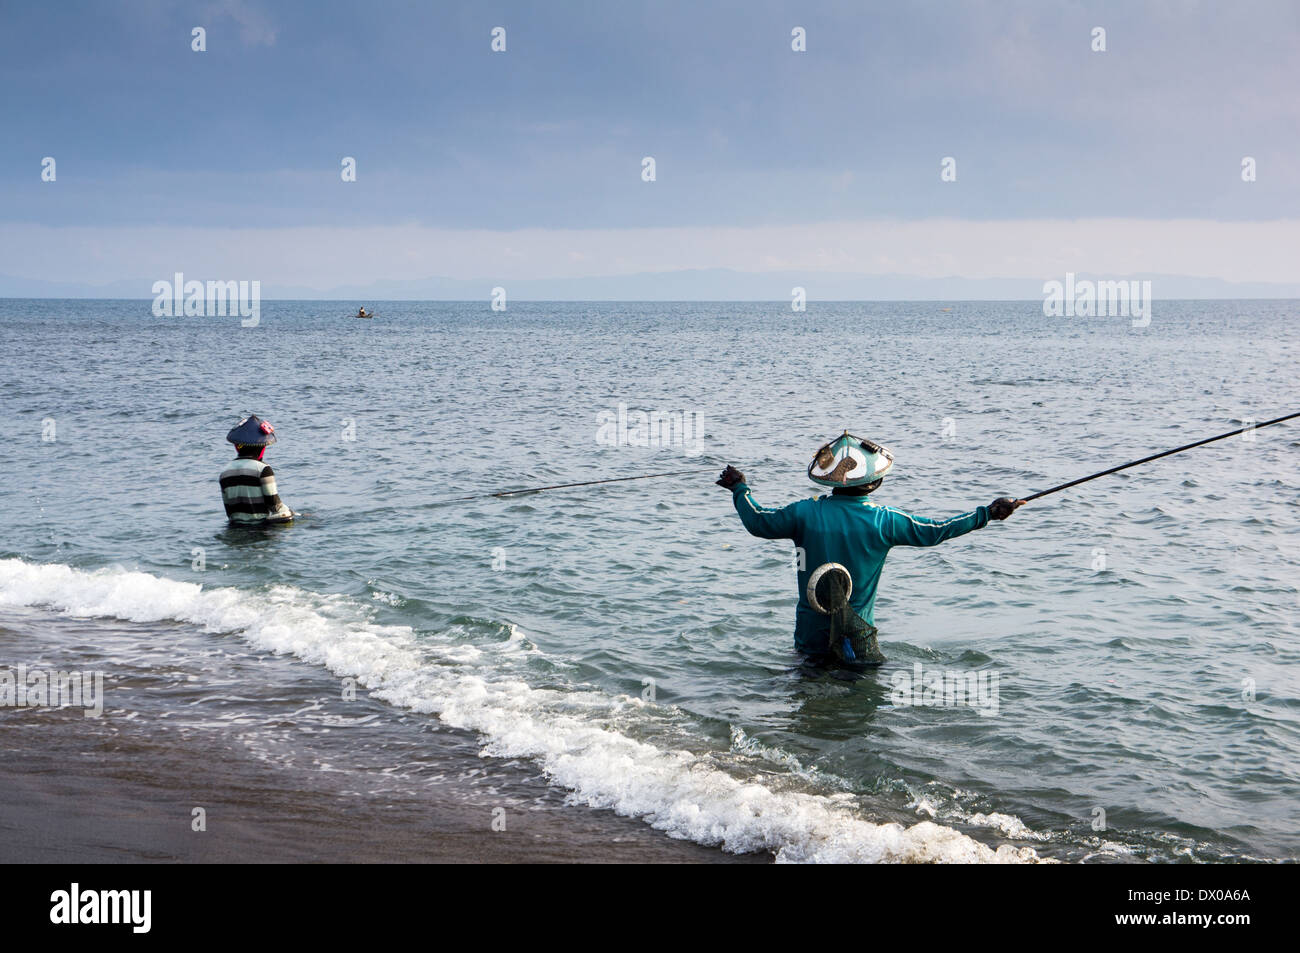 Local fisherman standing in the sea, holding a fishing rod to catch fish,  Lombok Island, Lesser Sunda Islands, Indonesia, Asia Stock Photo - Alamy